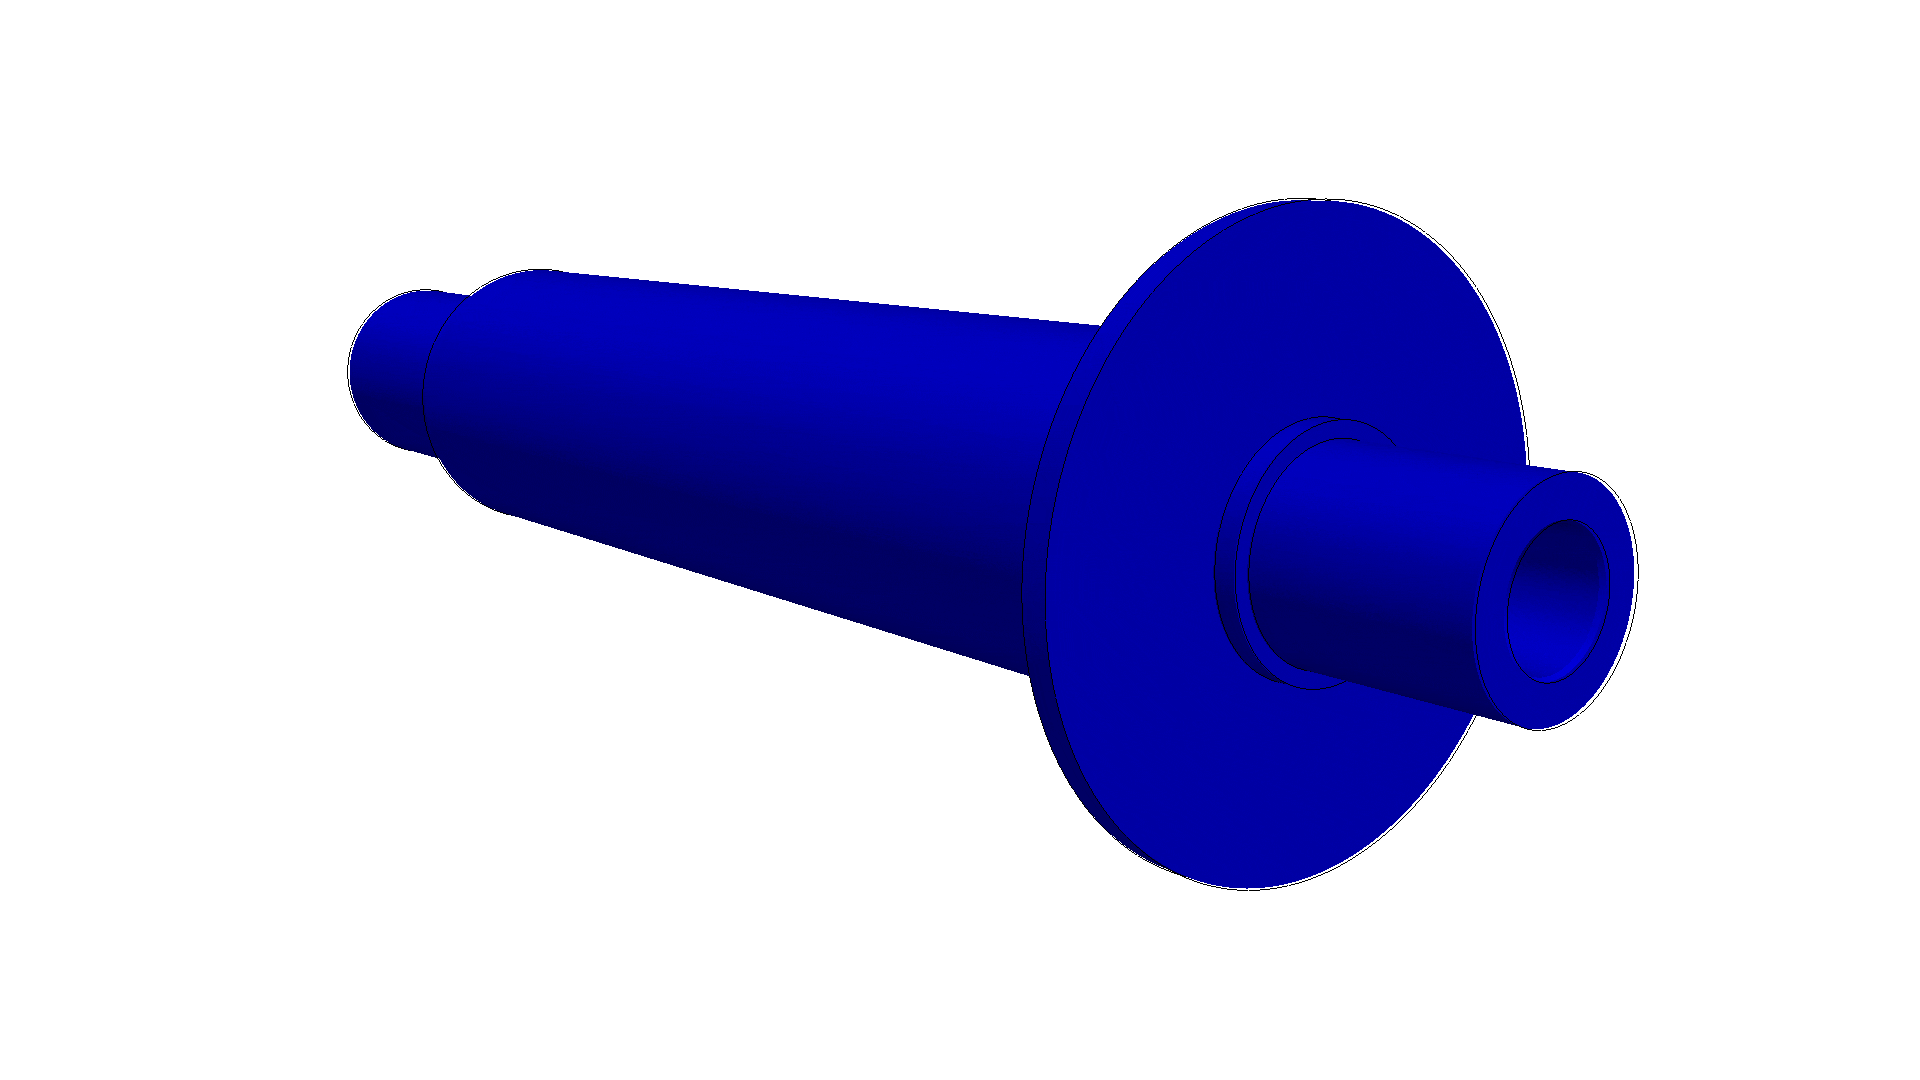 Second natural mode: radial expansion, FEA of a spindle by Carbomech with SimScale